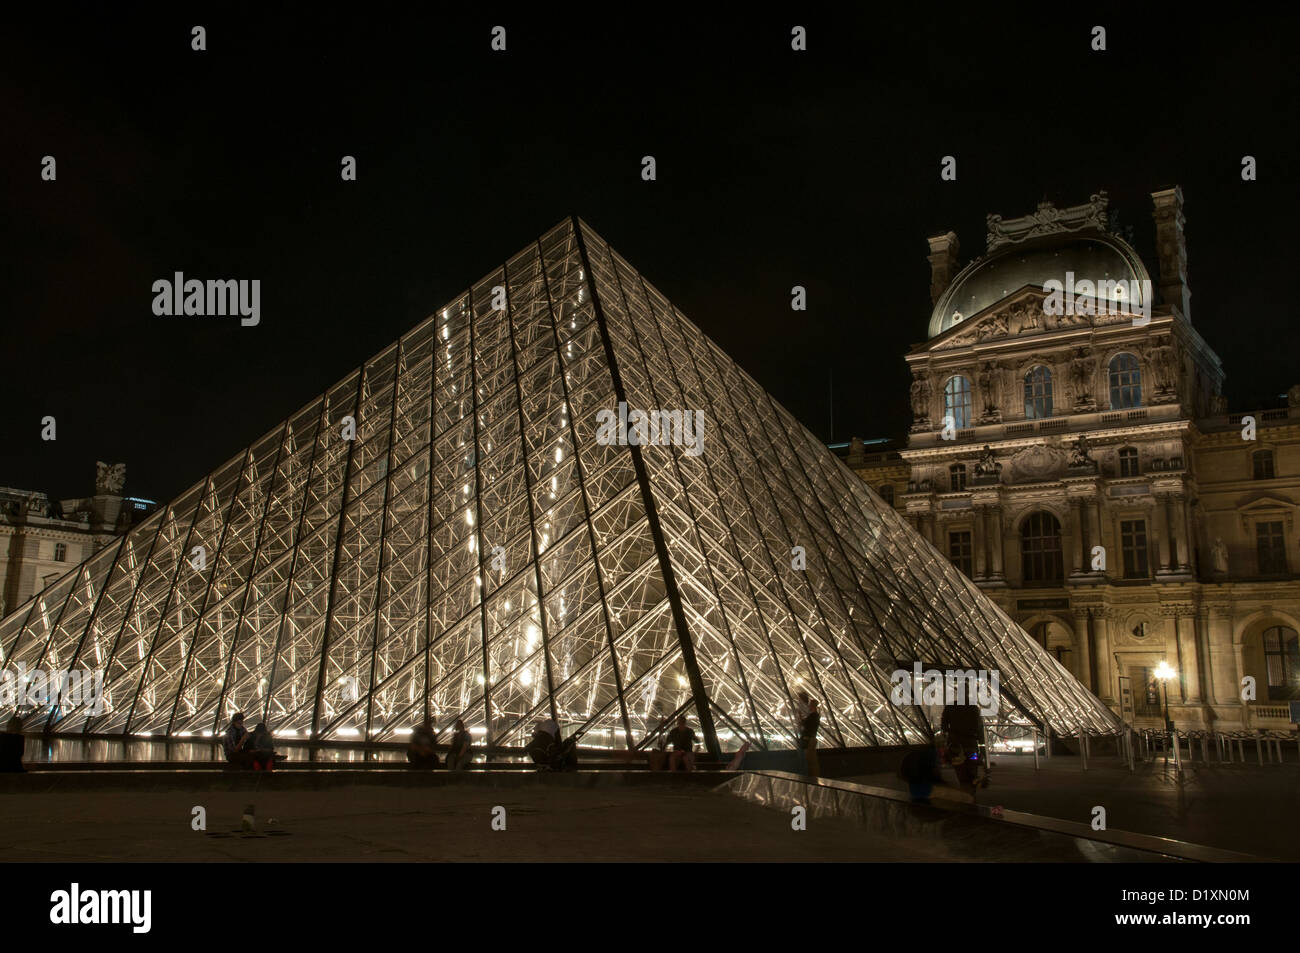 The Louvre Pyramid is a large glass and metal pyramid in the main courtyard of the Louvre Palace, Paris. Stock Photo